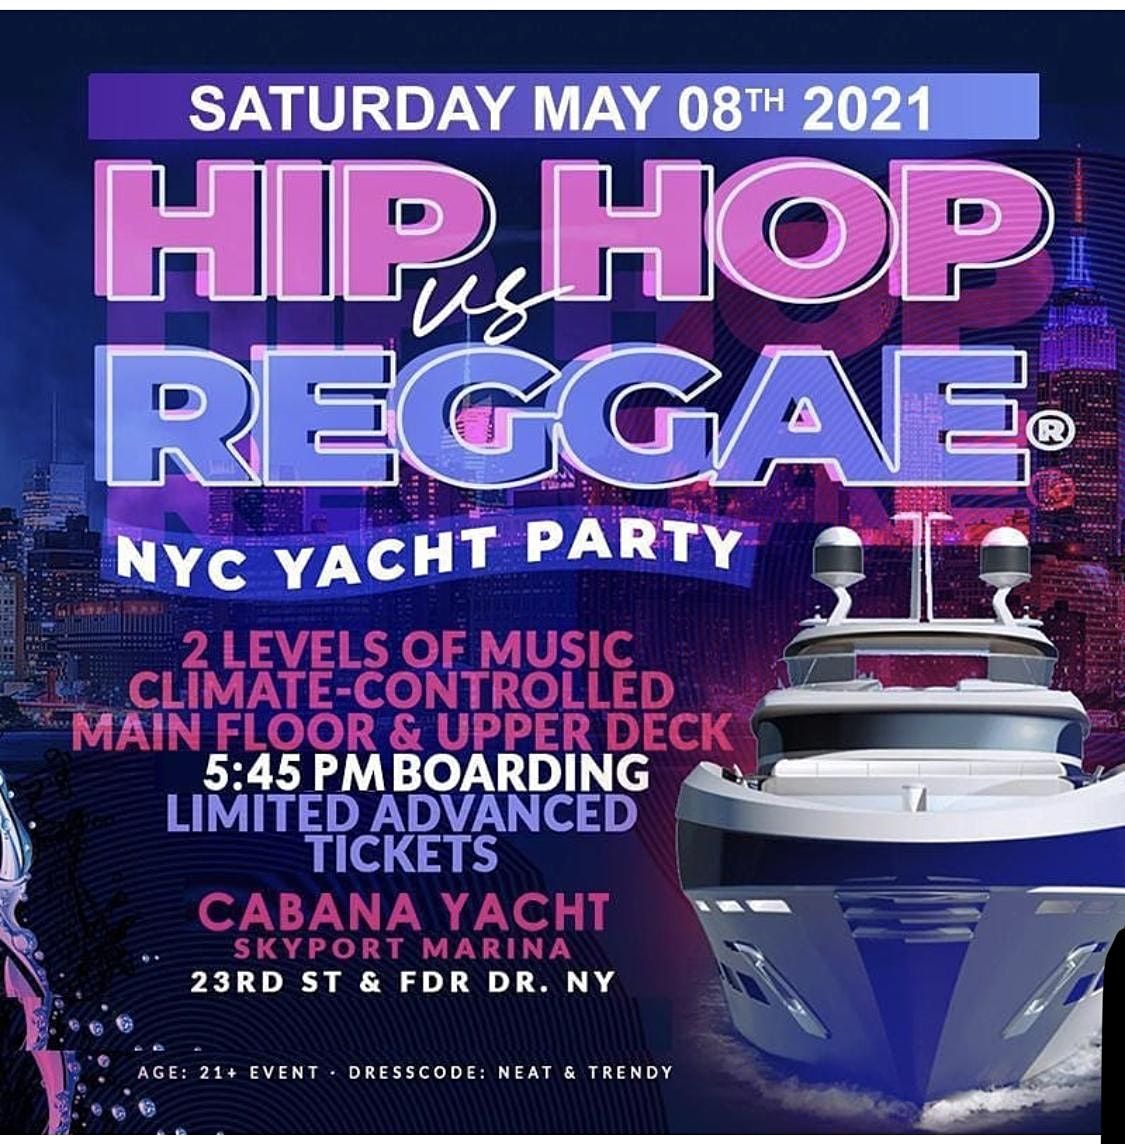 MIDNIGHT YACHT PARTY NYC! Sat., July 10th